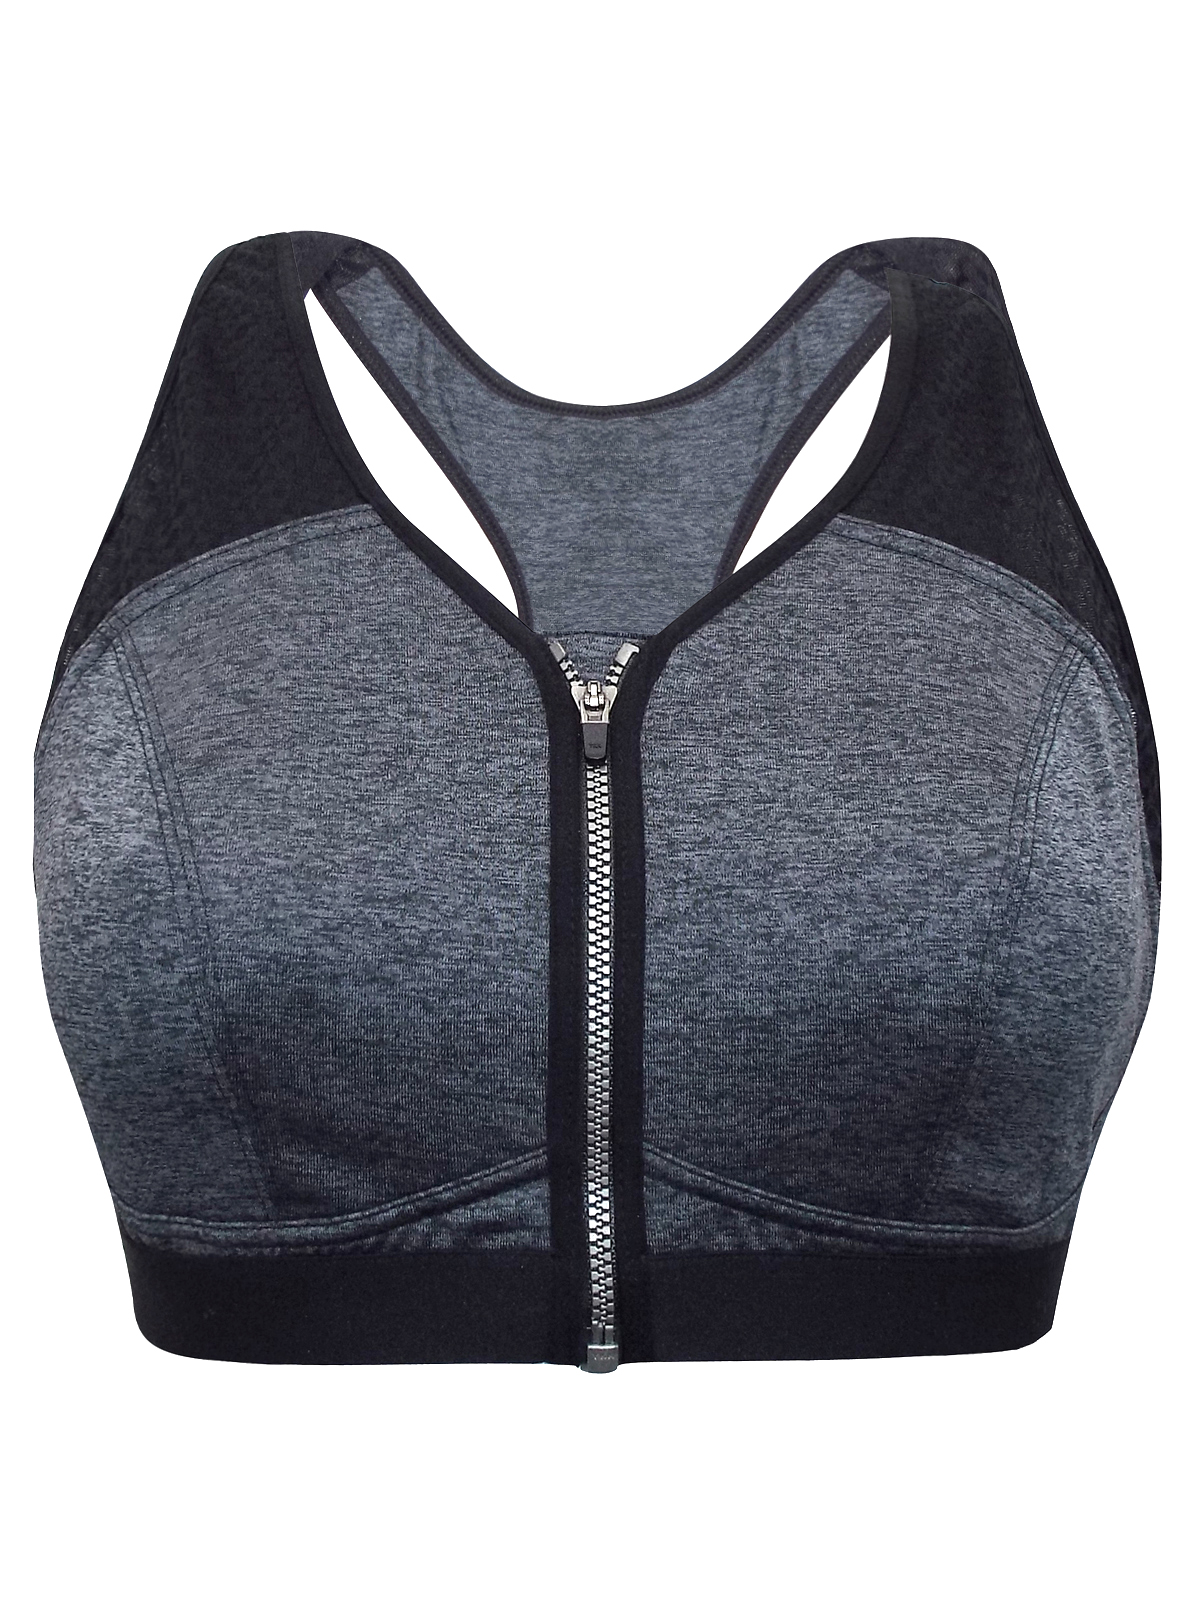 F&F two pack sports bras size Small.